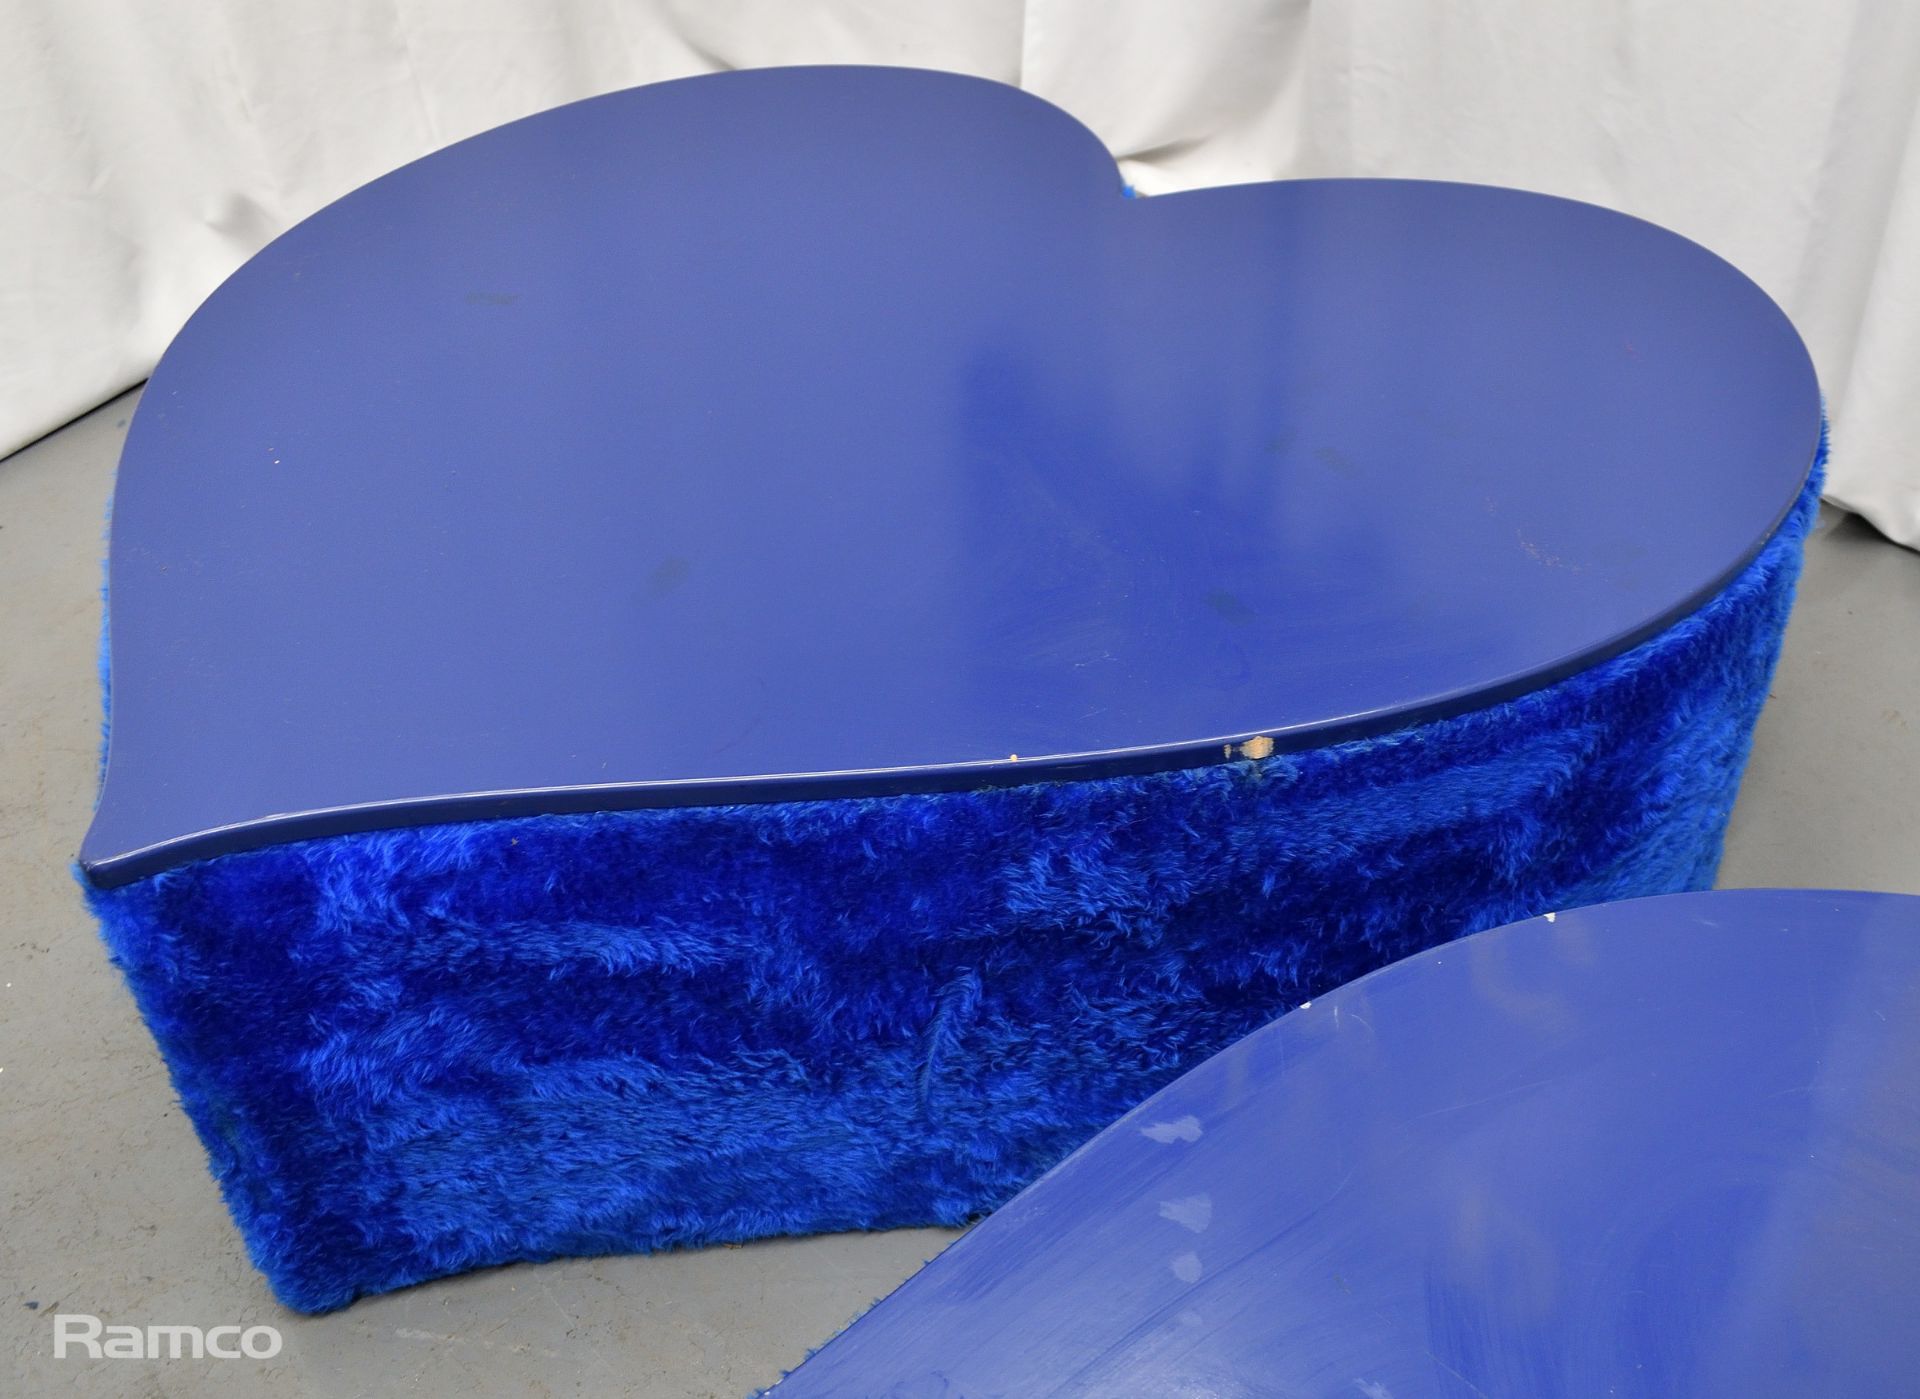 3x Asymmetrical heart shaped blue fur-covered wooden tables from countries' seating area - Image 7 of 13